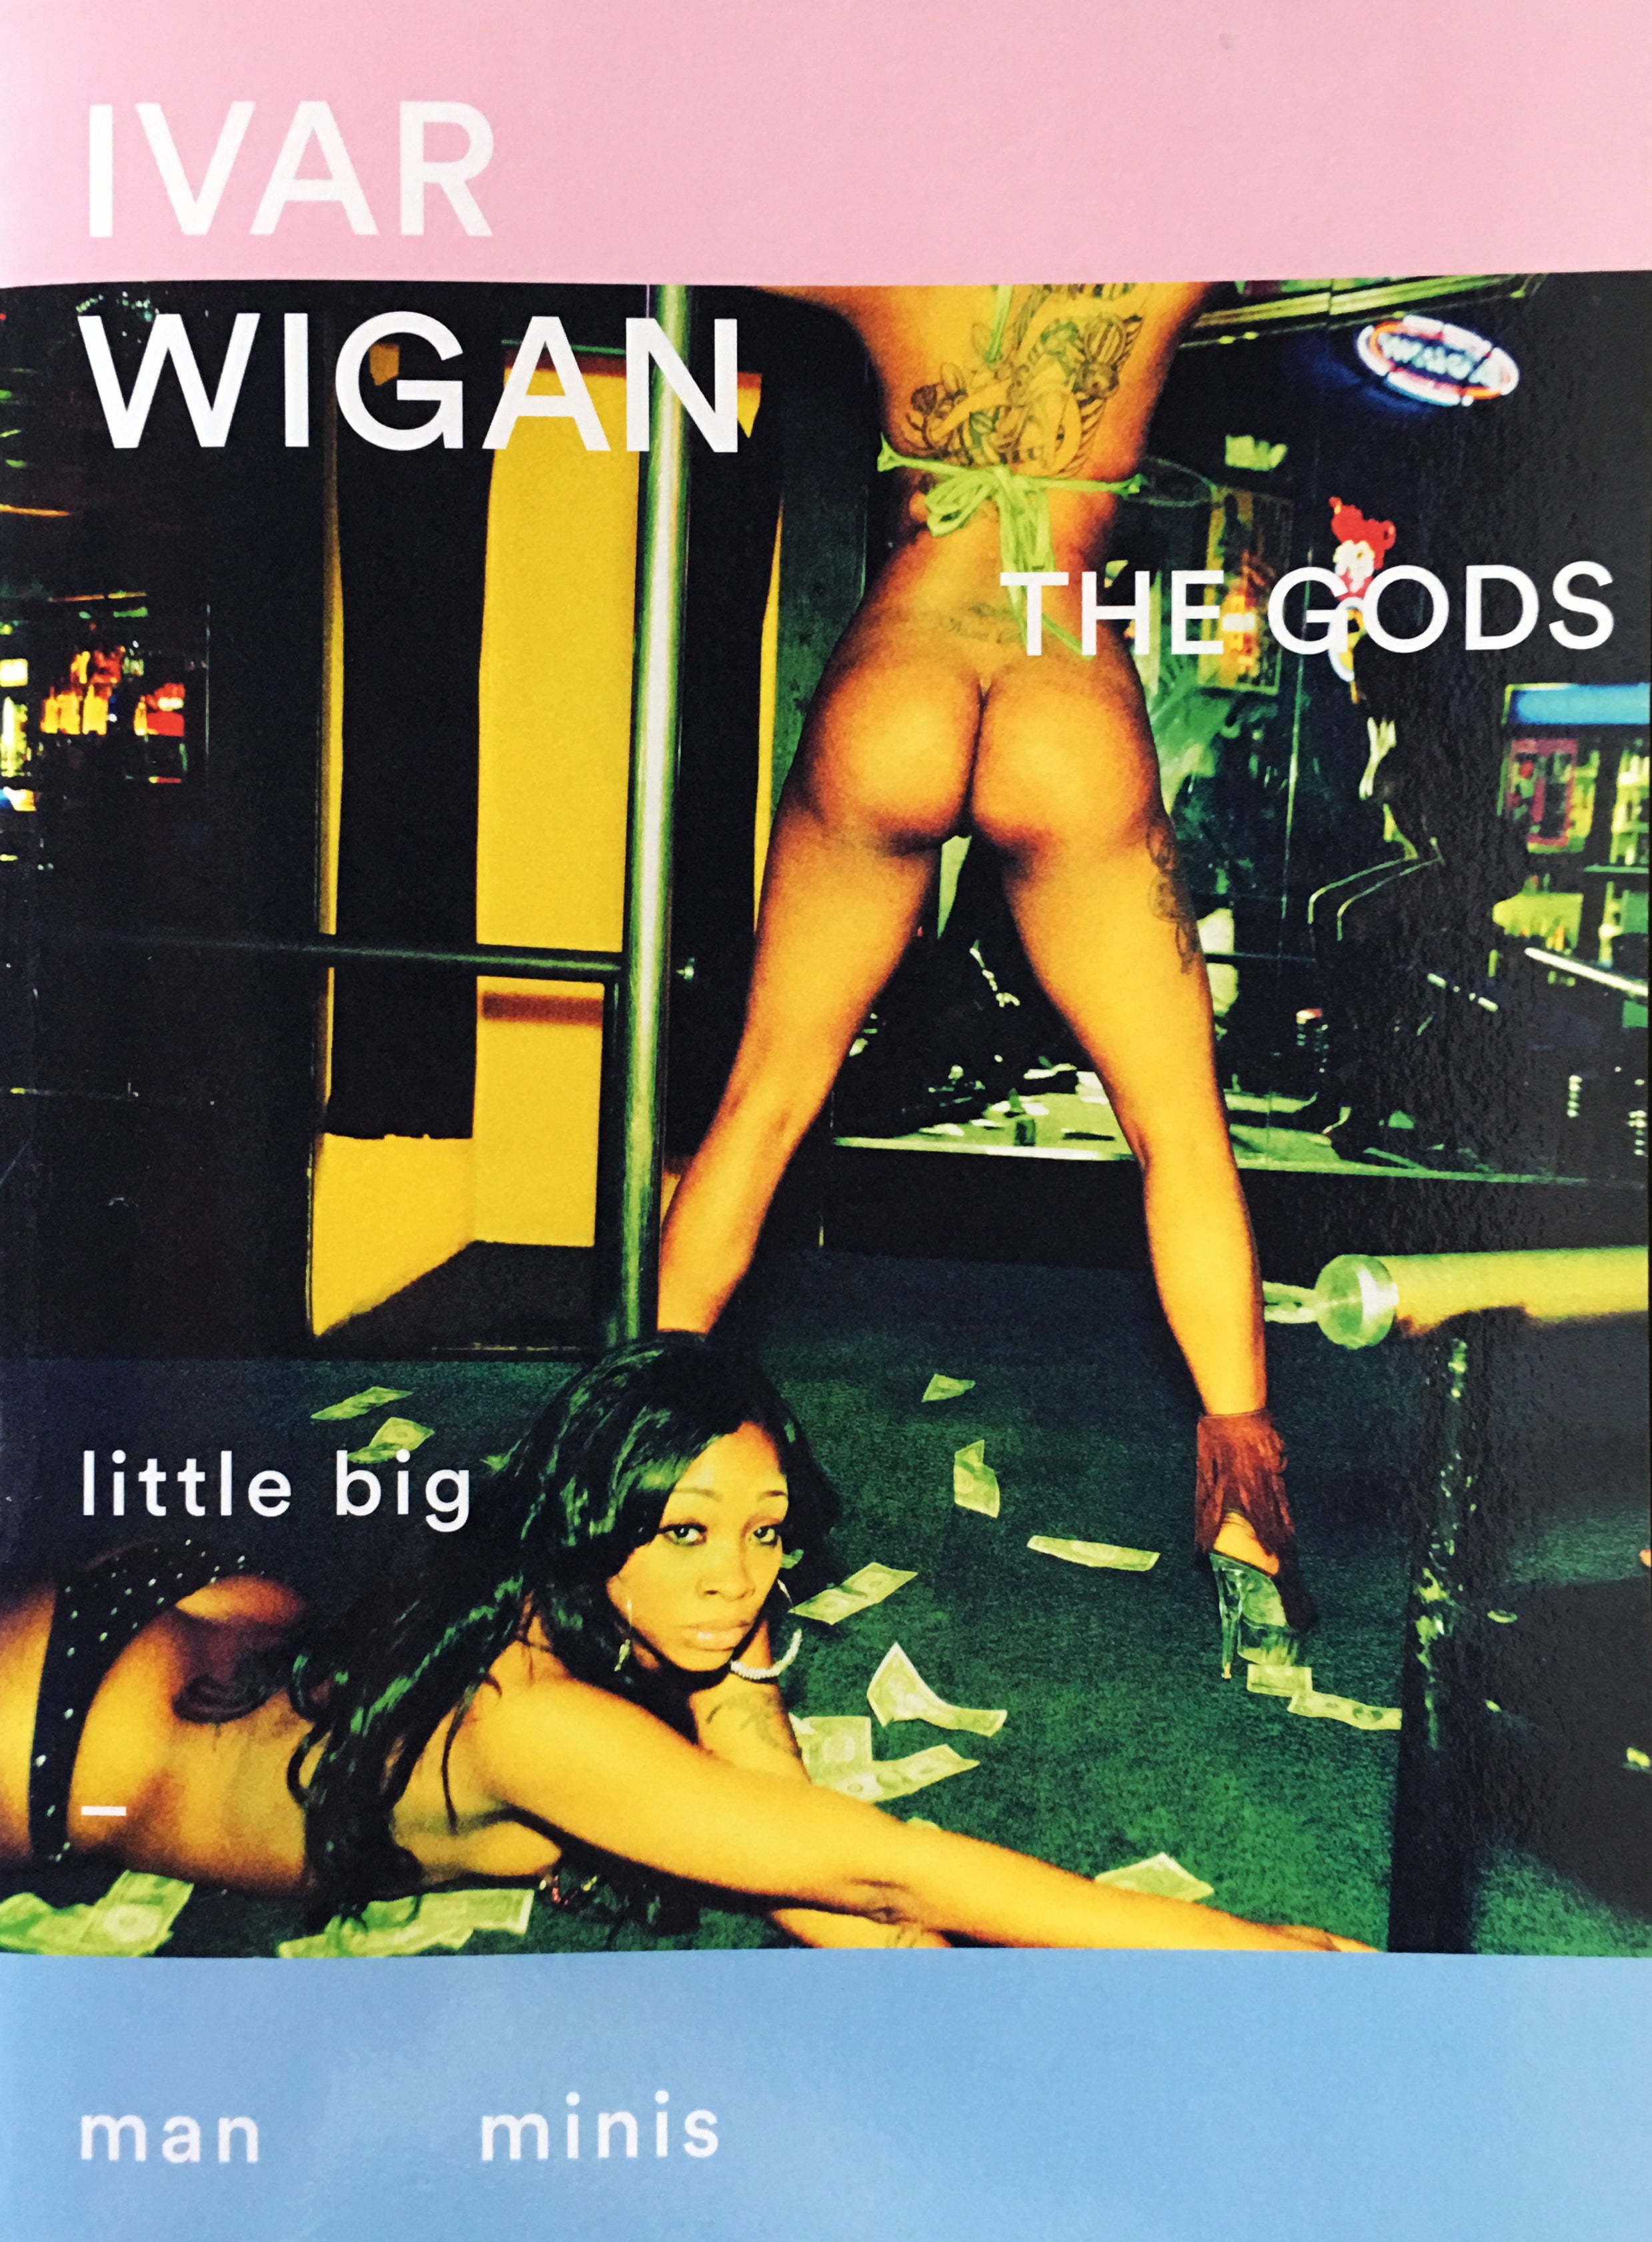 Ivar Wigan. THE GODS. Out of Print.